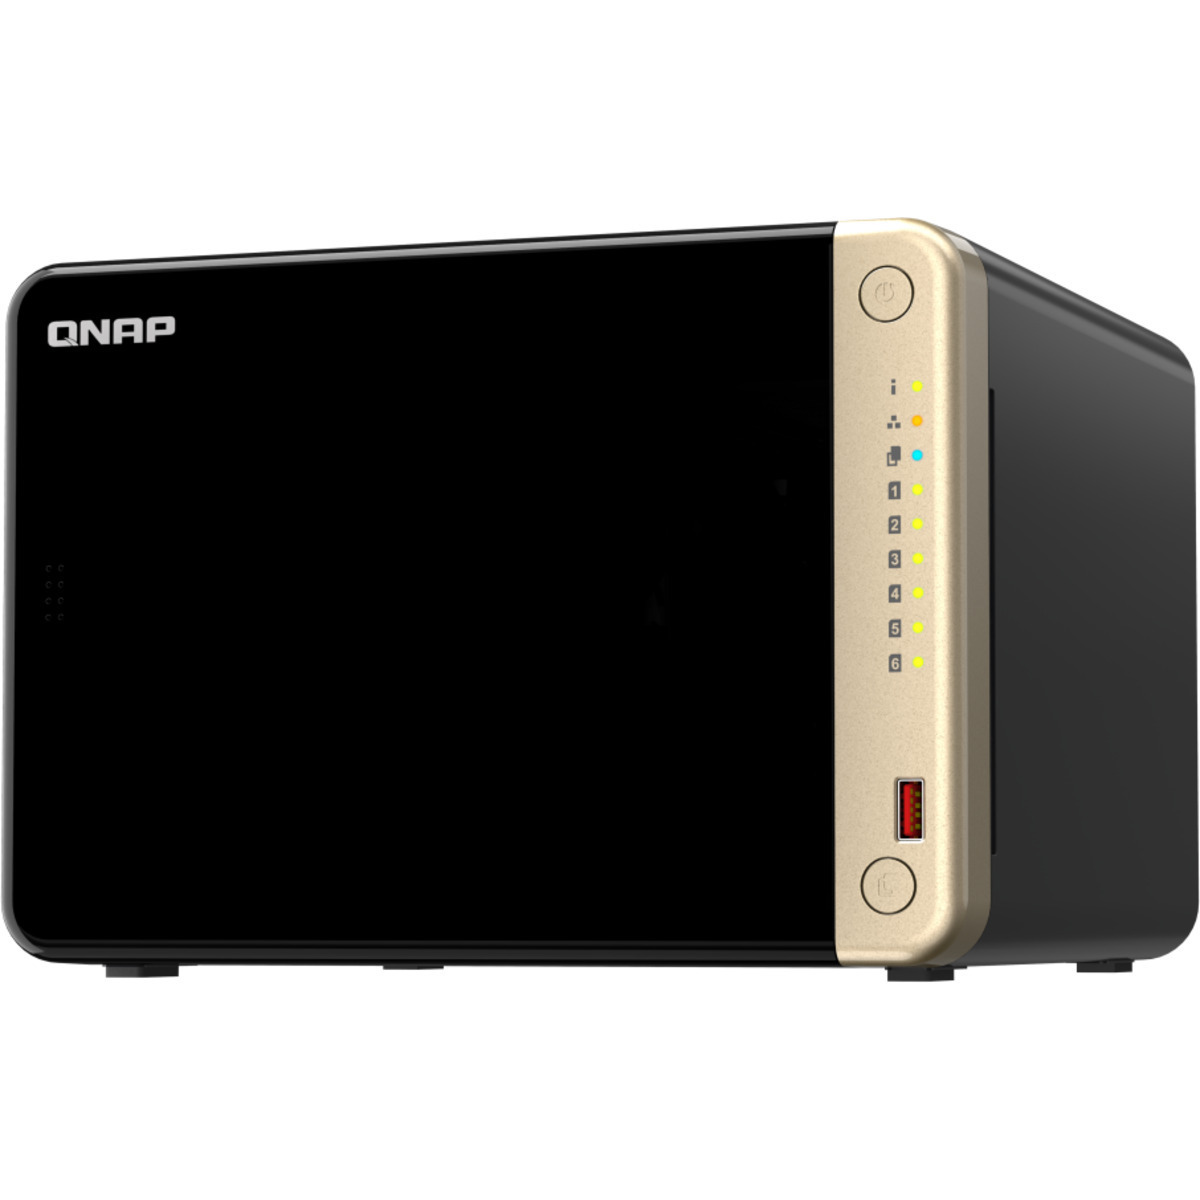 QNAP TS-664 90tb 6-Bay Desktop Multimedia / Power User / Business NAS - Network Attached Storage Device 5x18tb Western Digital Red Pro WD181KFGX 3.5 7200rpm SATA 6Gb/s HDD NAS Class Drives Installed - Burn-In Tested TS-664